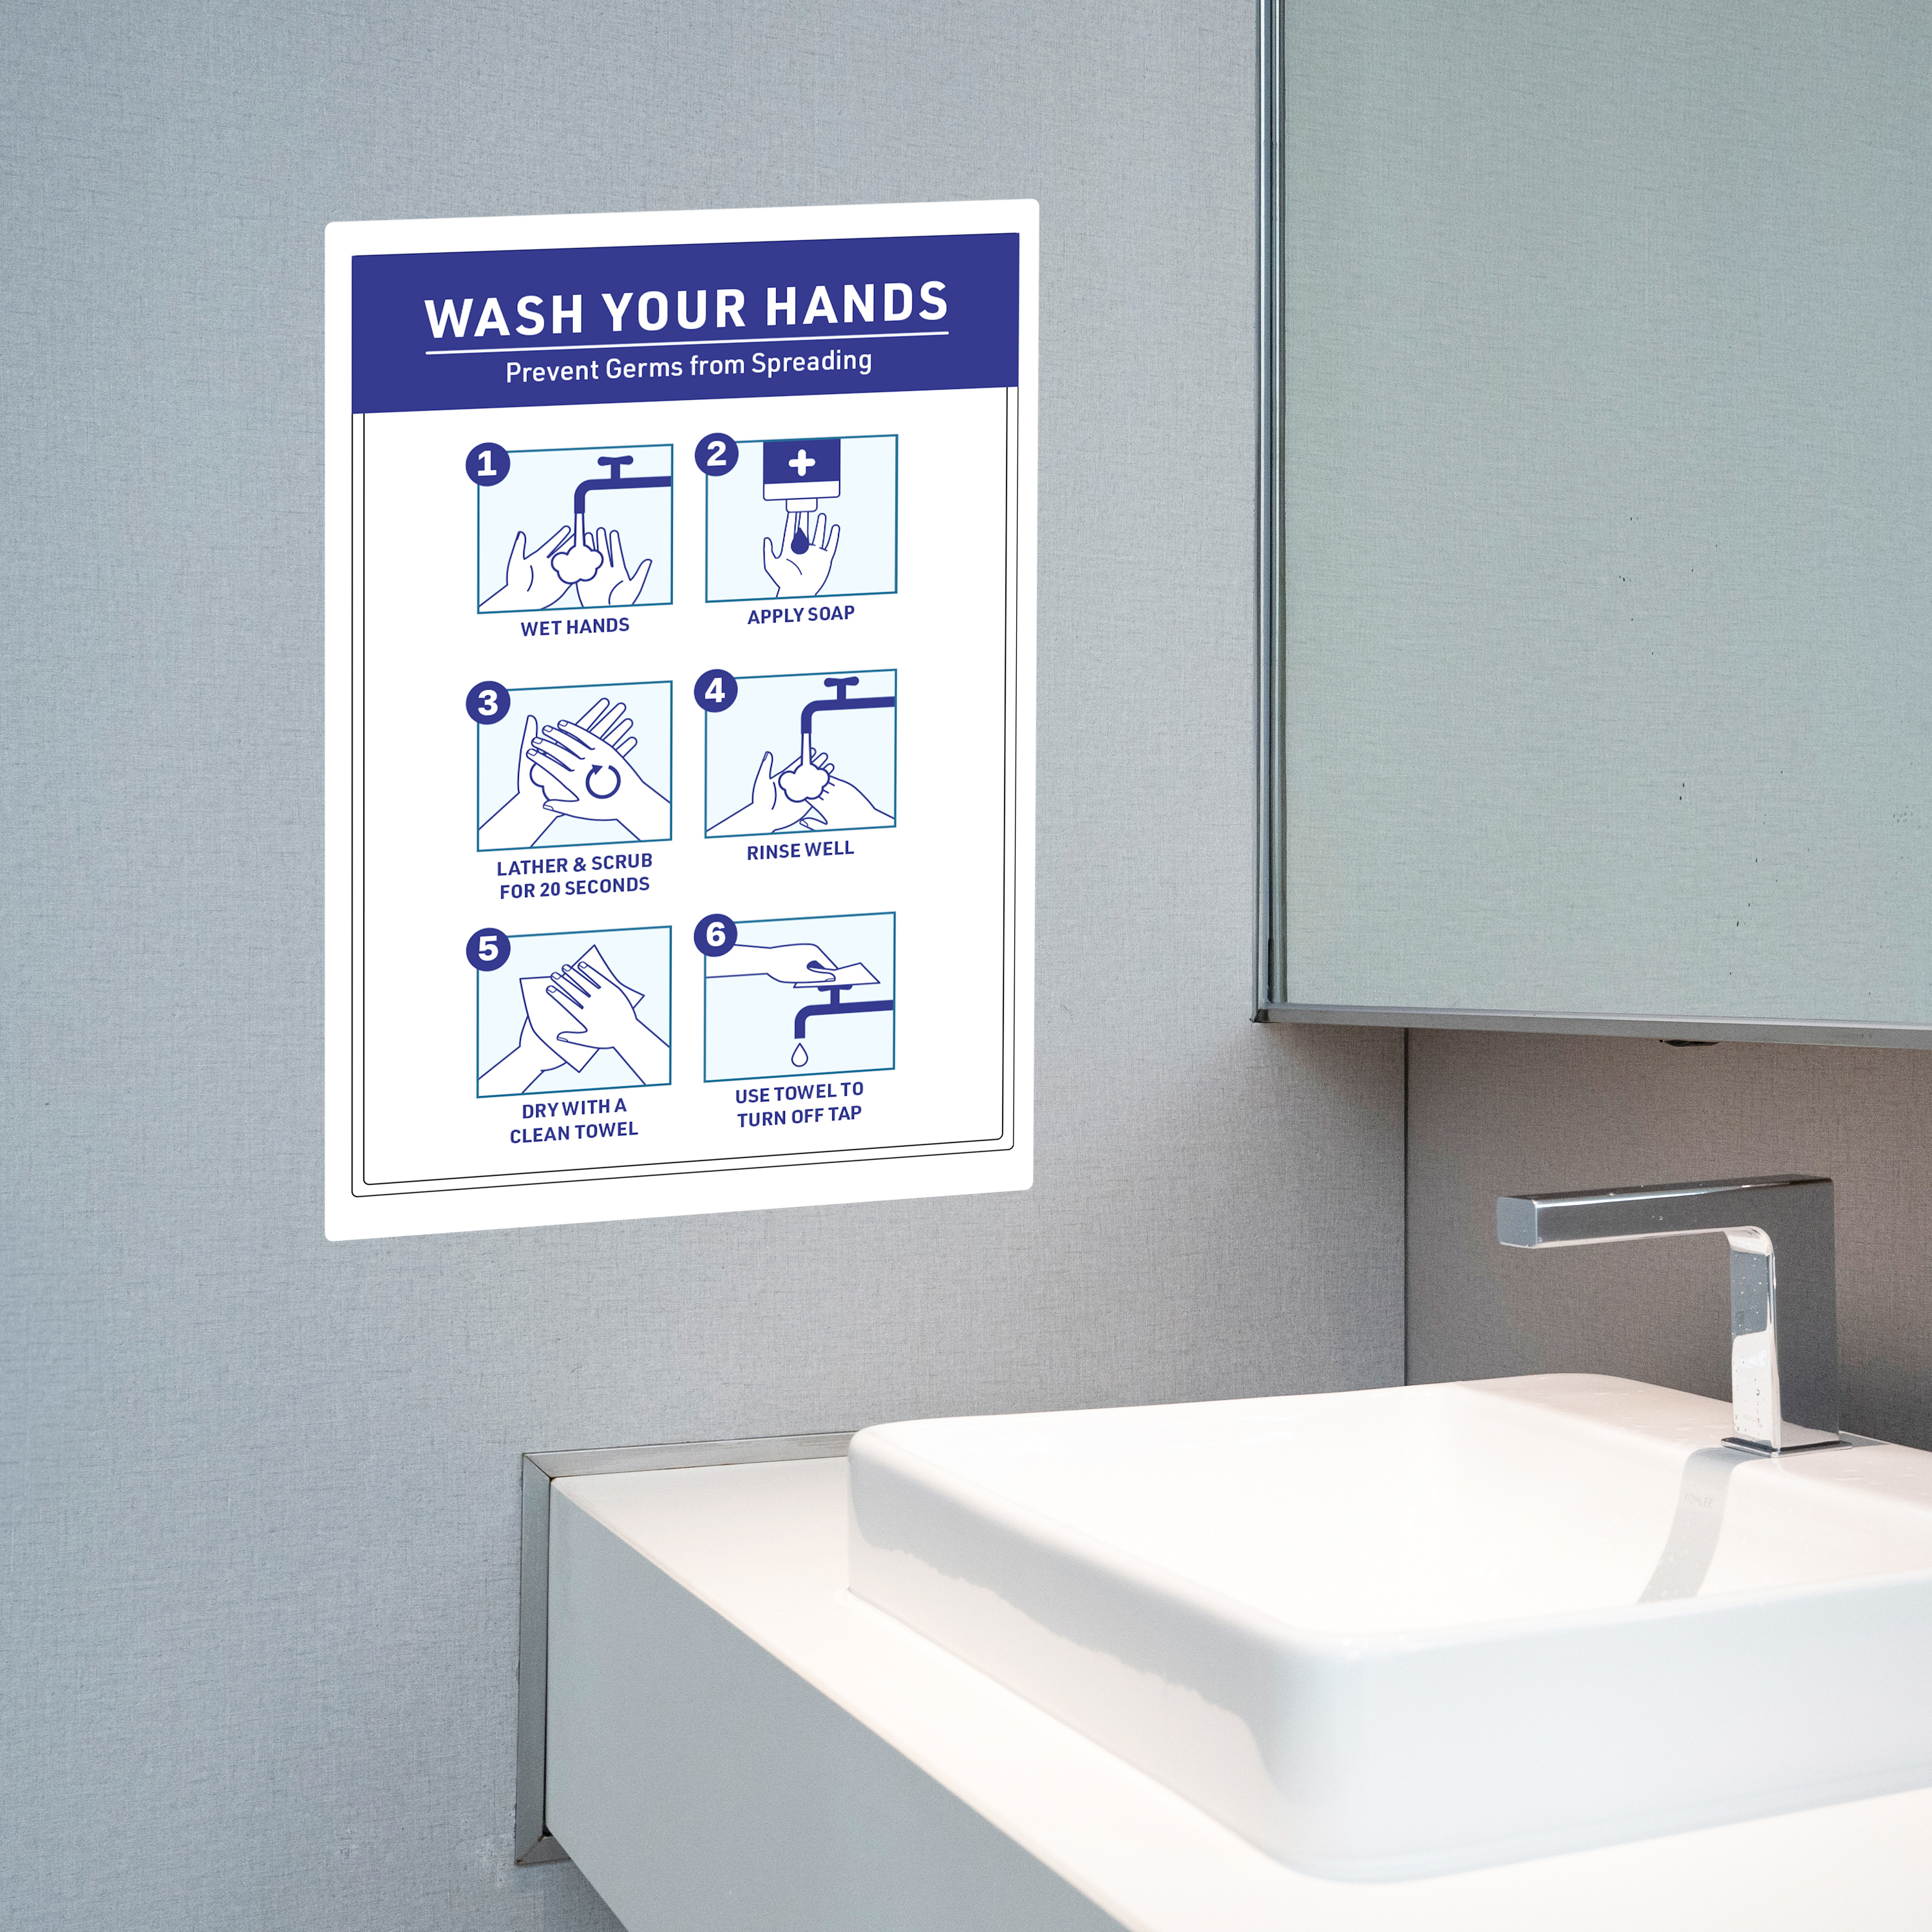 An example of a handwashing sign posted in a bathroom. The sign is printed on Avery 61552 vinyl sign labels.